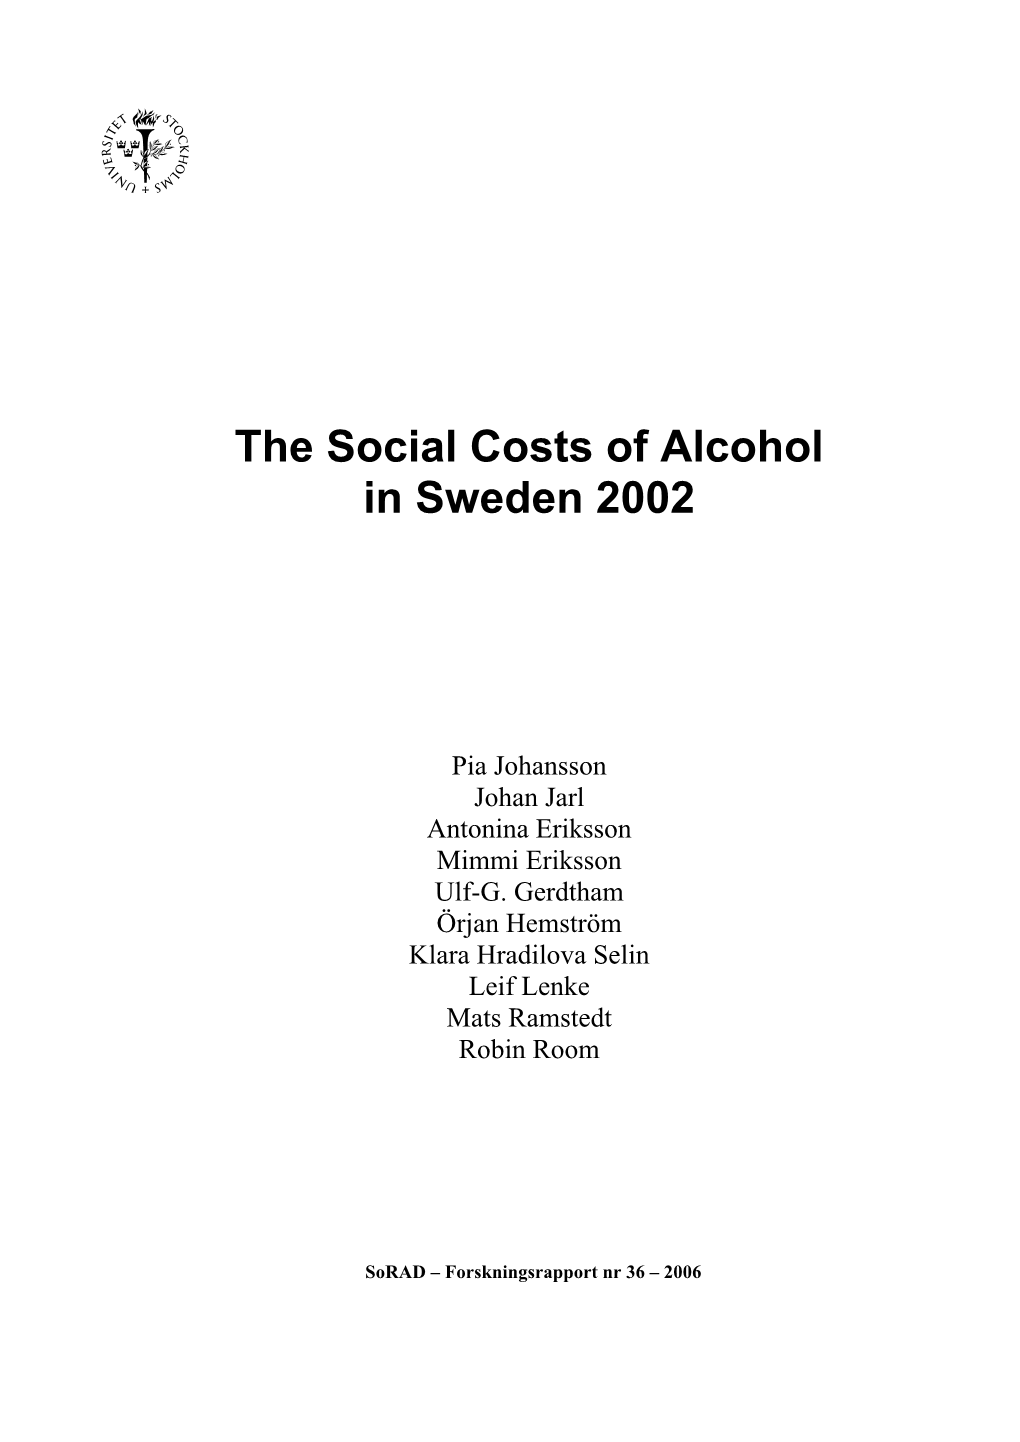 The Social Costs of Alcohol in Sweden 2002